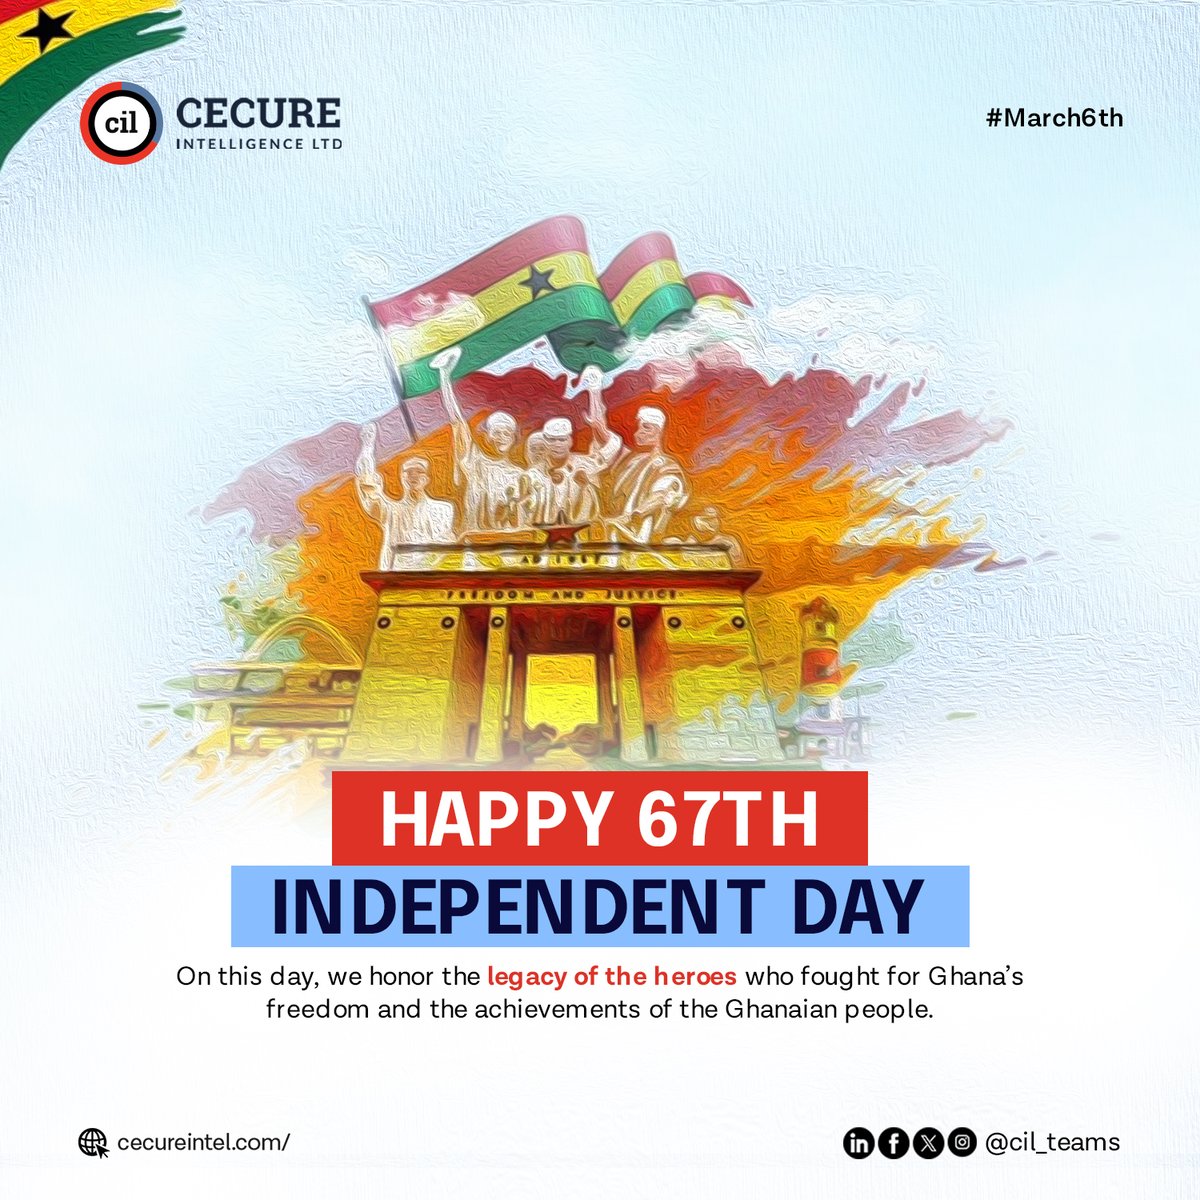 Happy 67th Independence Day, Ghana! 

Today, let us embrace the true meaning of independence and strive to make a positive impact in our communities and in the world.

#CIL #AWS #IndependenceDay #Ghana #CelebrateFreedom